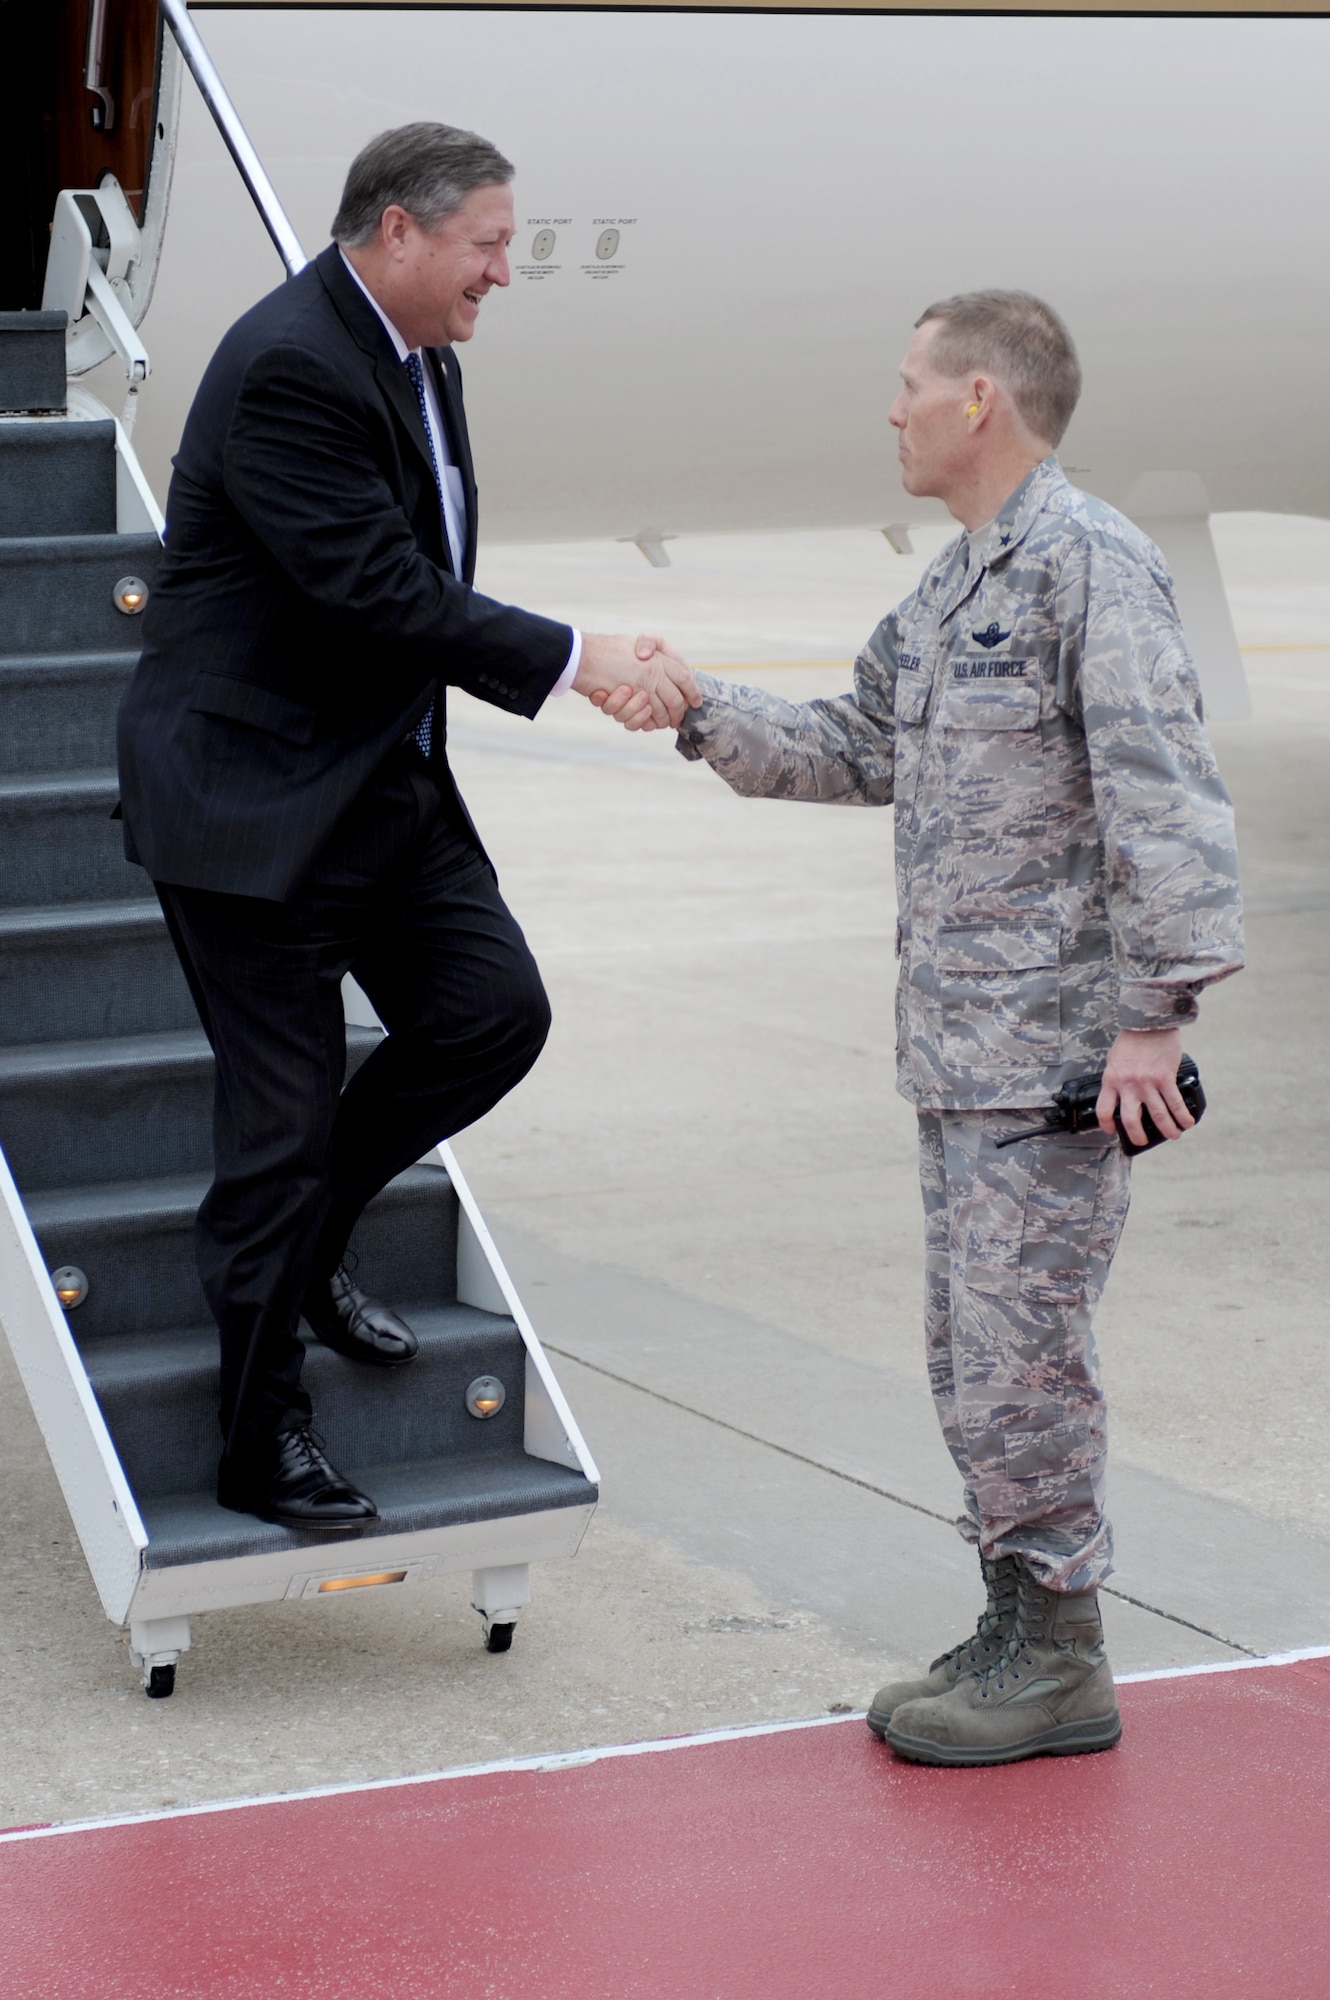 Secretary of the Air Force Michael Donley is greeted by Brig. Gen. Robert Wheeler June 8, 2010, at Whiteman Air Force Base, Mo. Secretary Donley visited Whiteman AFB to become more familiar with the wing's mission and speak with base Airmen. General Wheeler is the 509th Bomb Wing commander. (U.S. Air Force photo/Airman 1st Class Carlin Leslie)